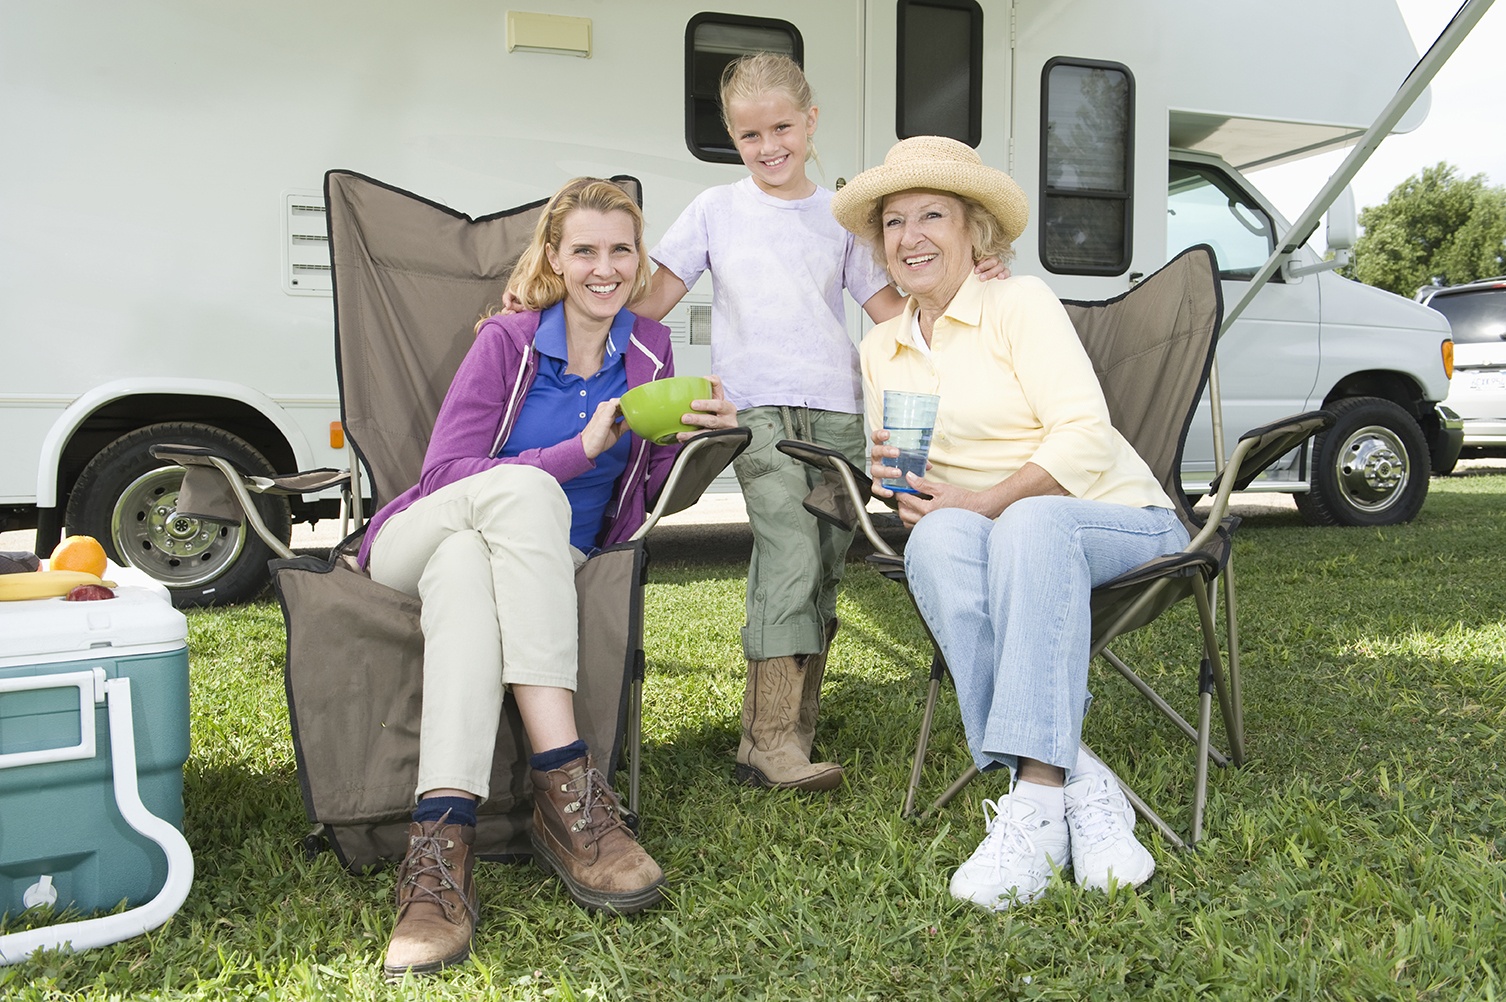 Five Best Campgrounds Near the Hershey Pennsylvania RV Show